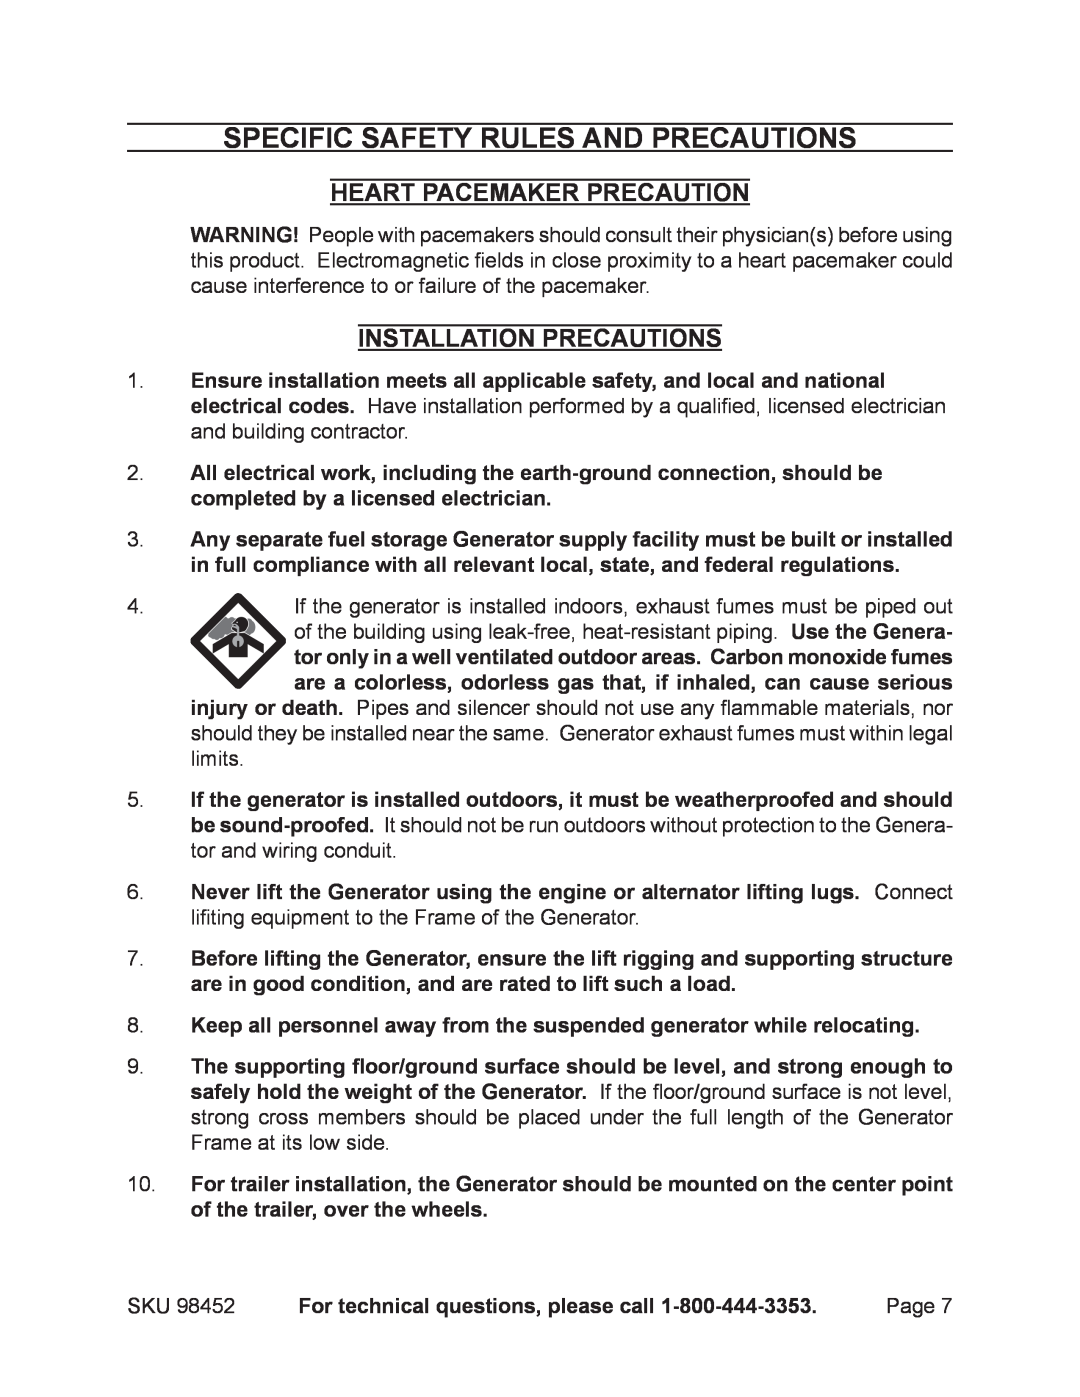 Chicago Electric 98452 Specific Safety Rules And Precautions, Heart Pacemaker Precaution, Installation Precautions 